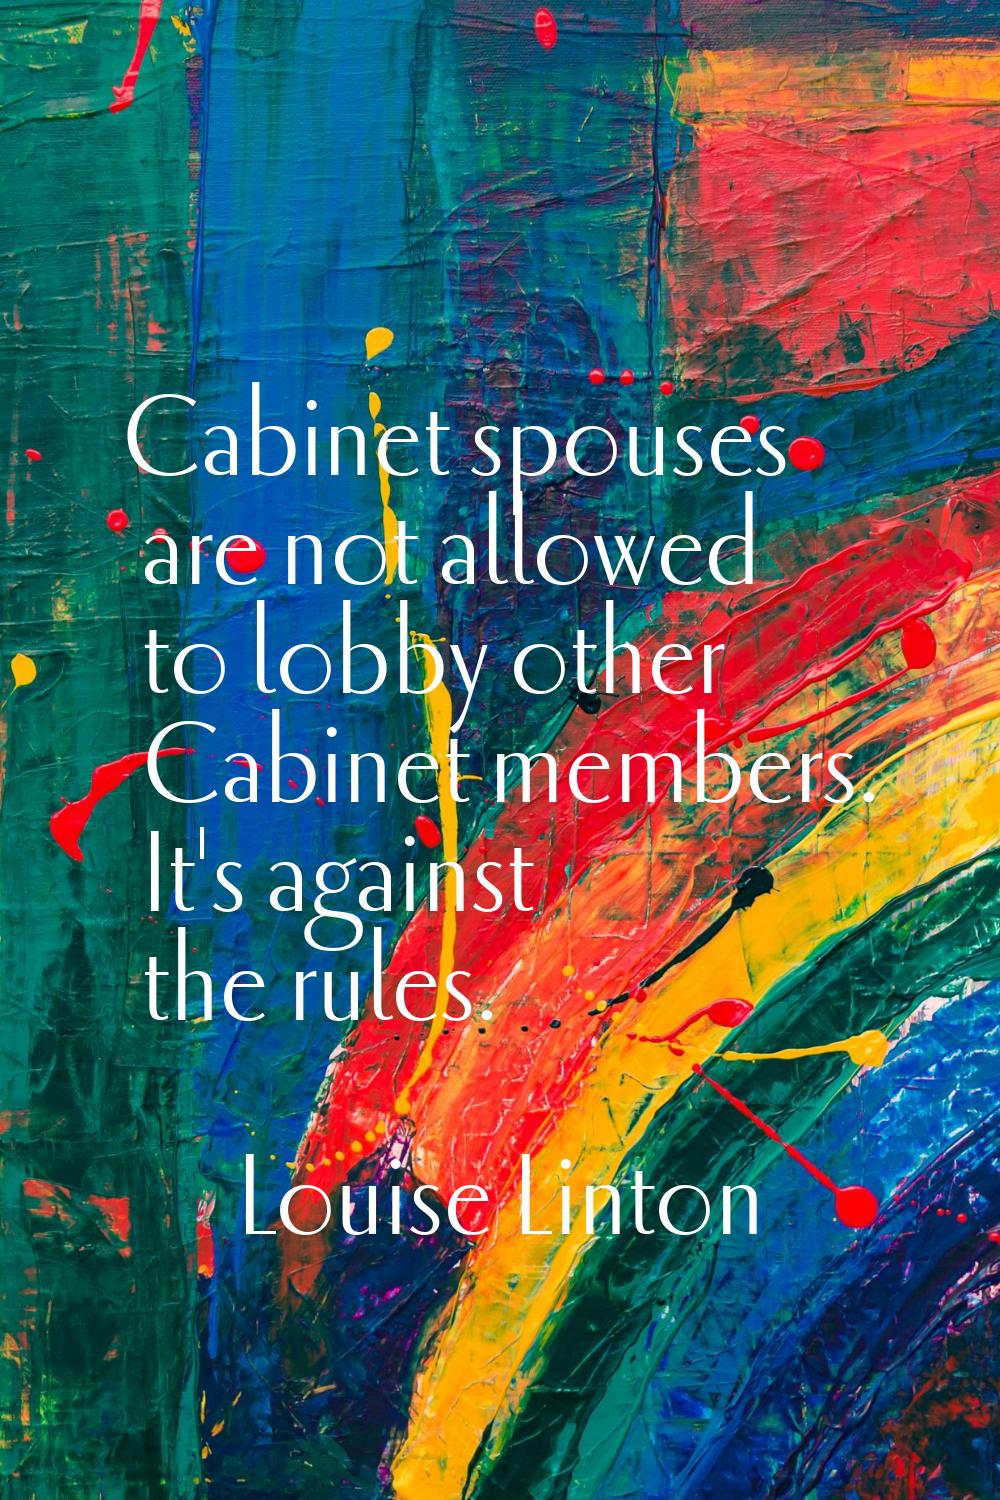 Cabinet spouses are not allowed to lobby other Cabinet members. It's against the rules.